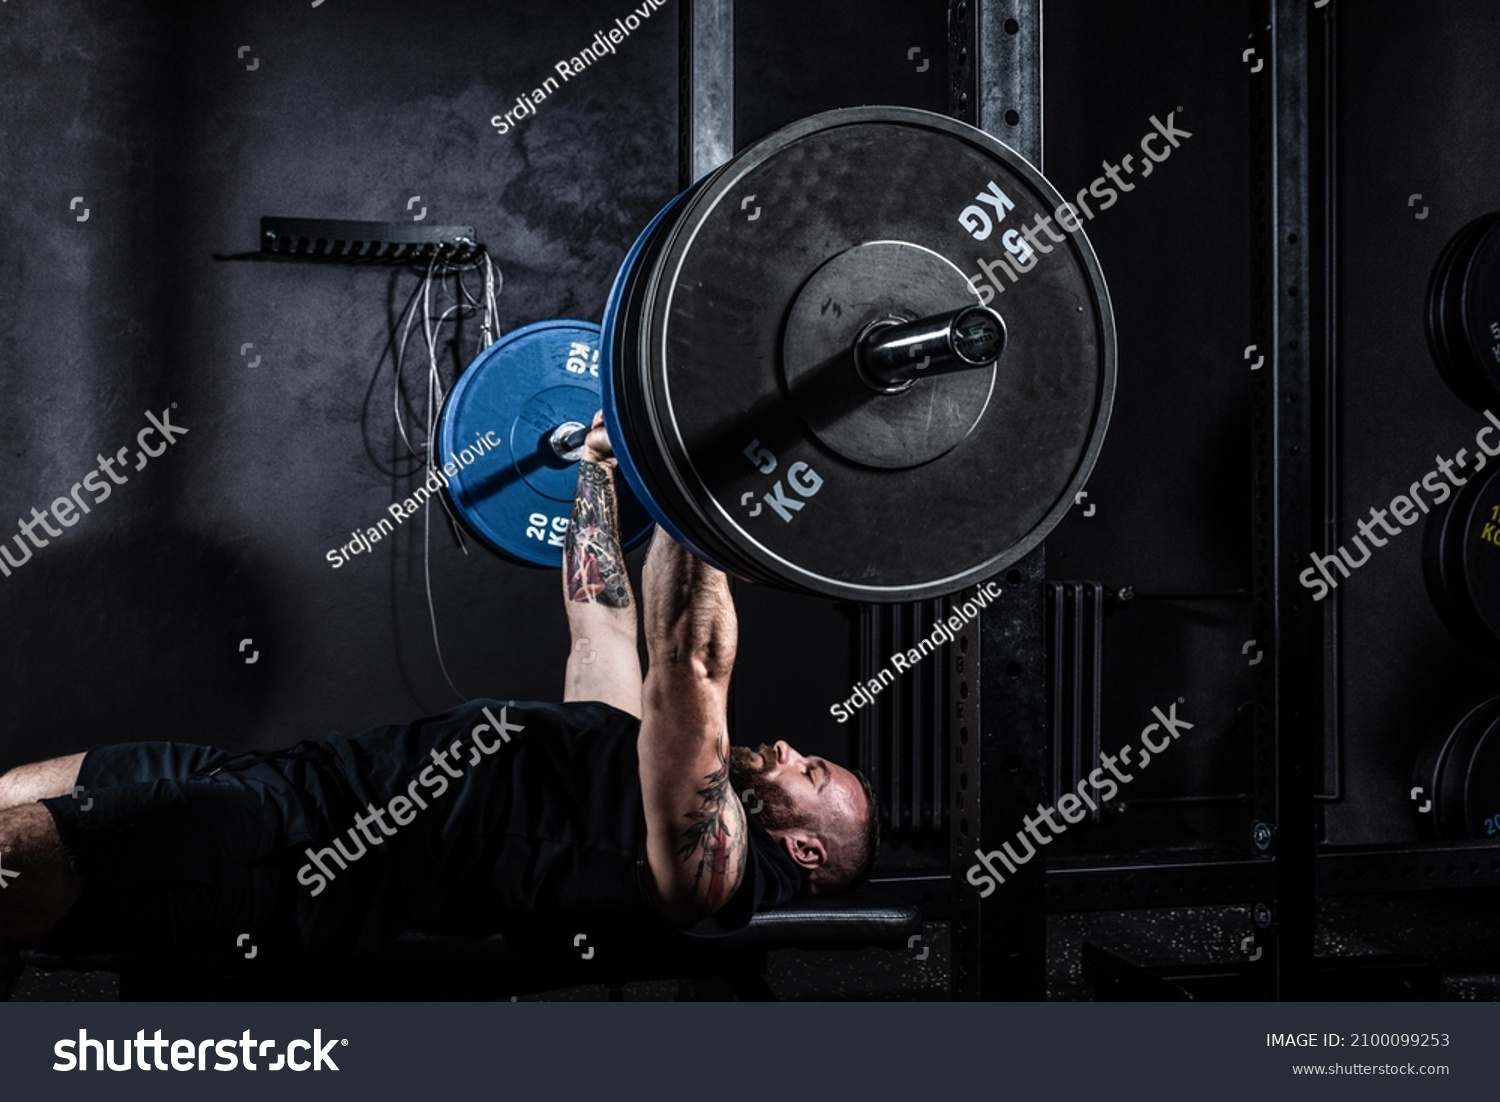 Strong sweaty muscular athlete fit active man doing hardcore bench press with heavy barbell weights in the gym. Active male bodybuilder workout and crossfit training concept. Real people exercise #2100099253